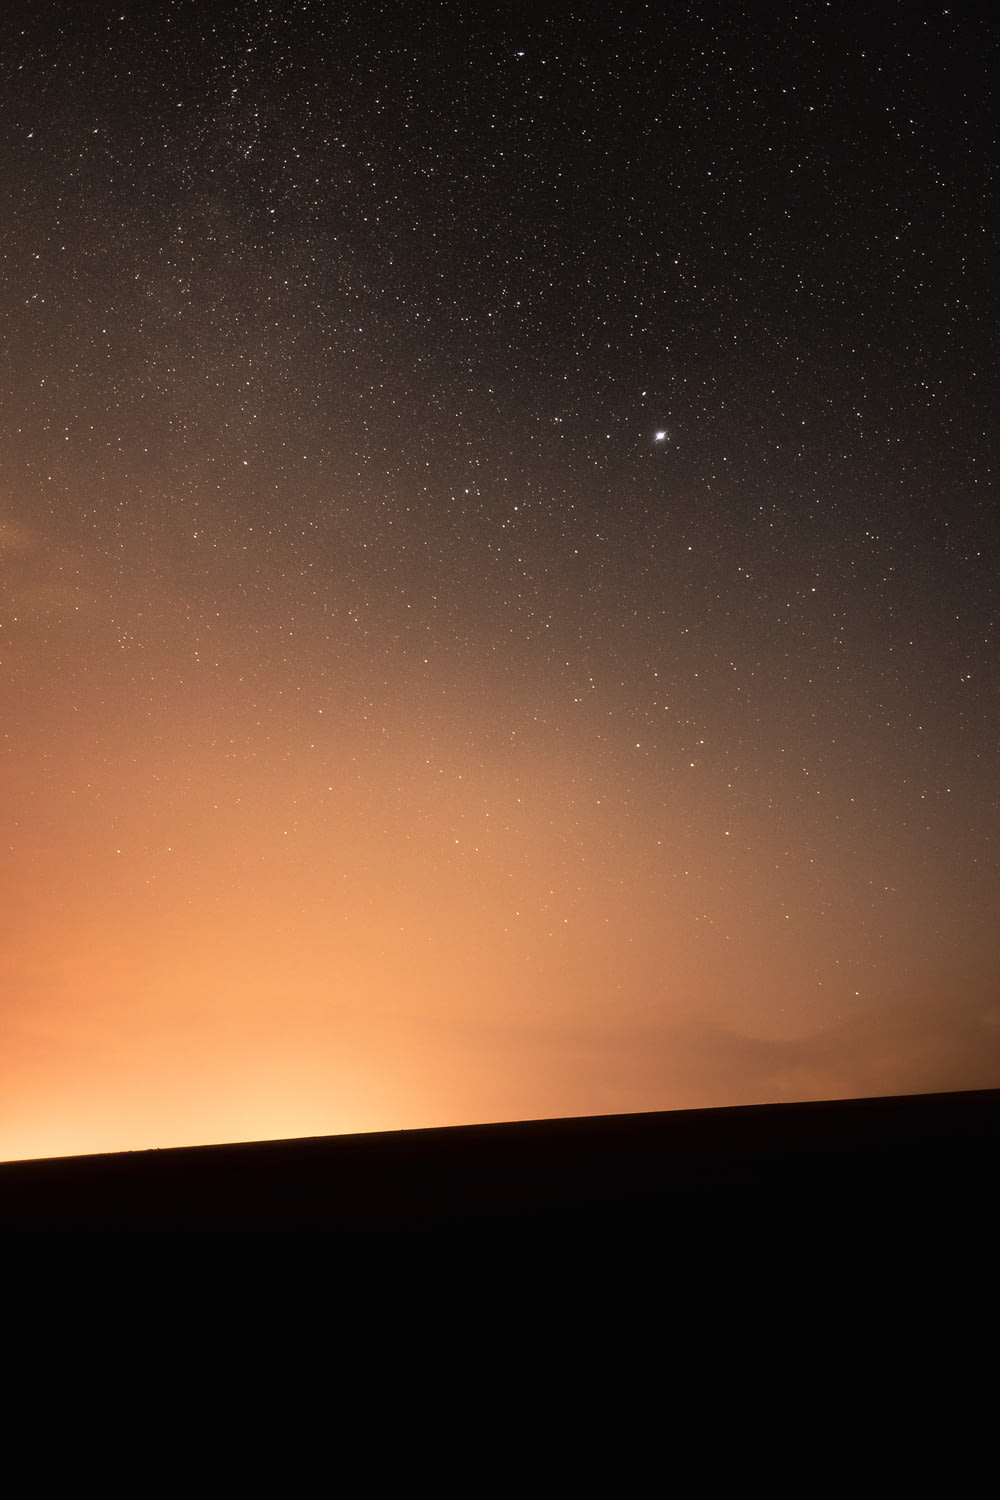 the night sky with stars and a bright orange glow